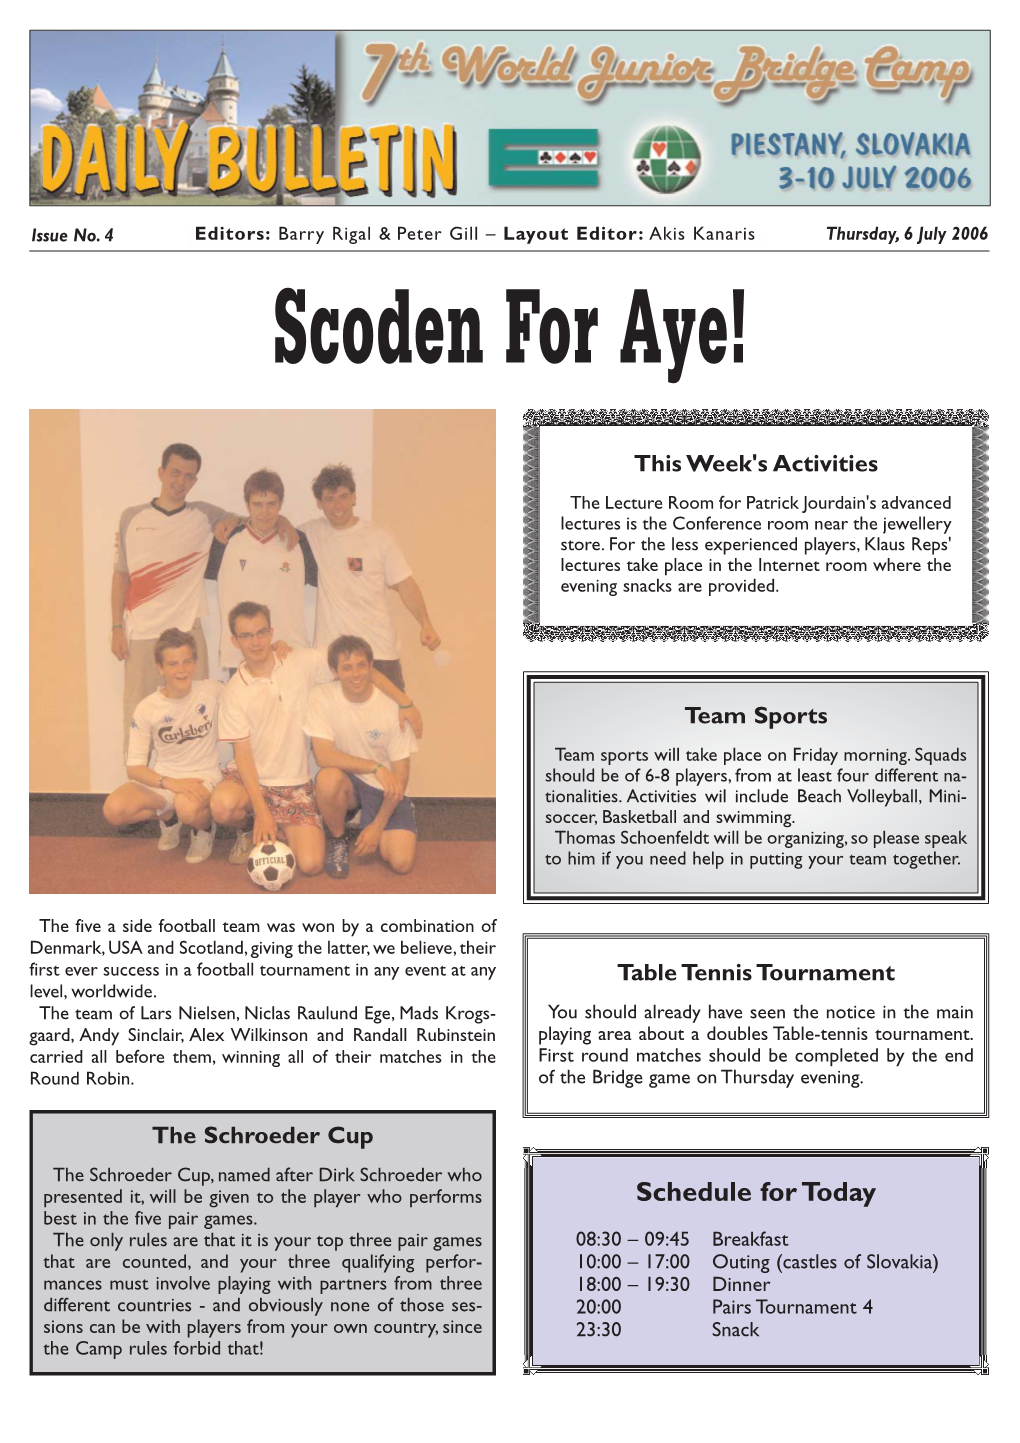 Scoden for Aye!